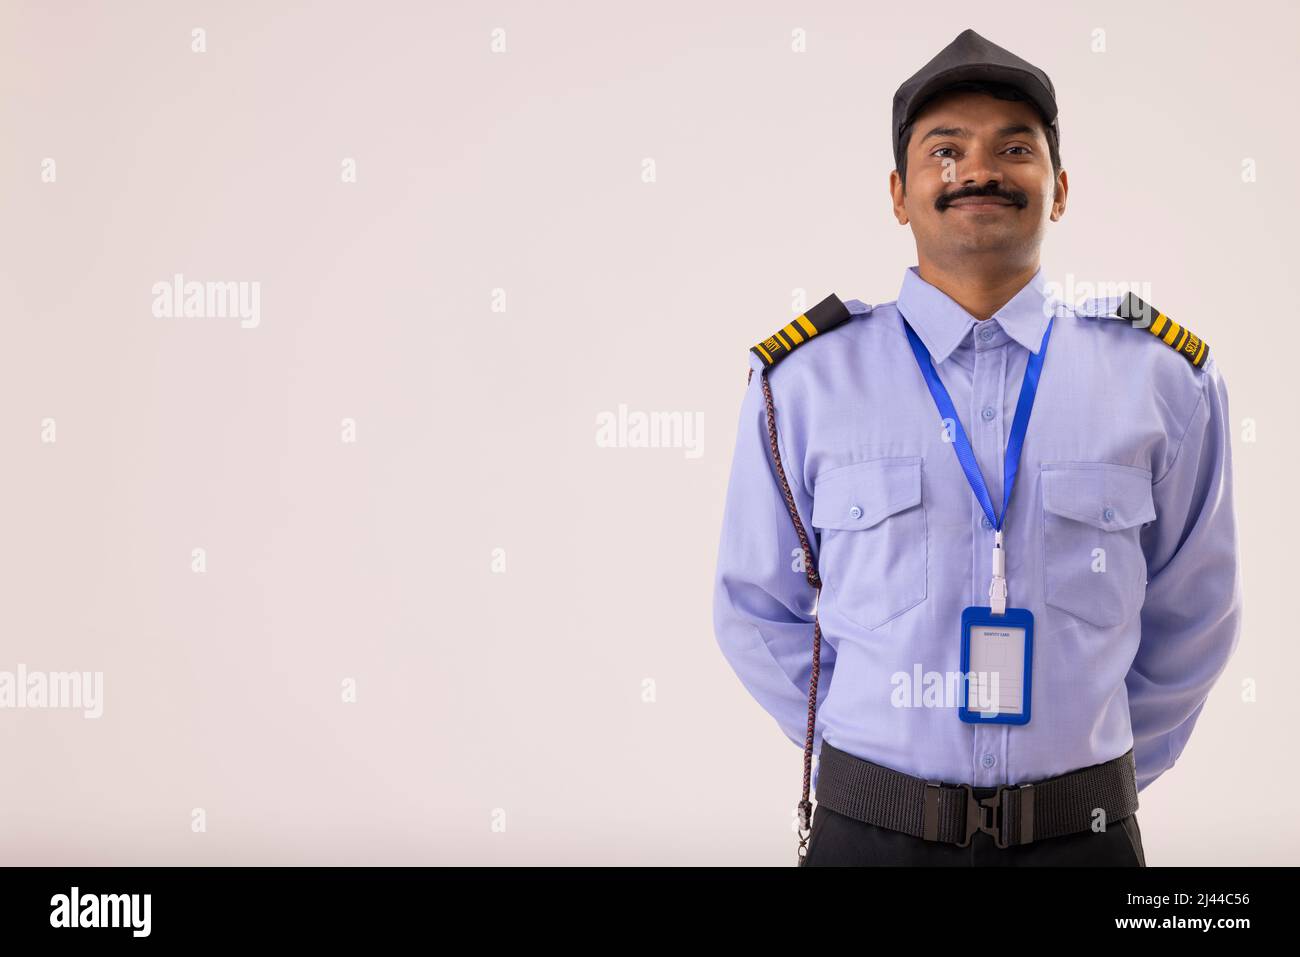 Portrait of Security guard posing with hands behind back Stock Photo